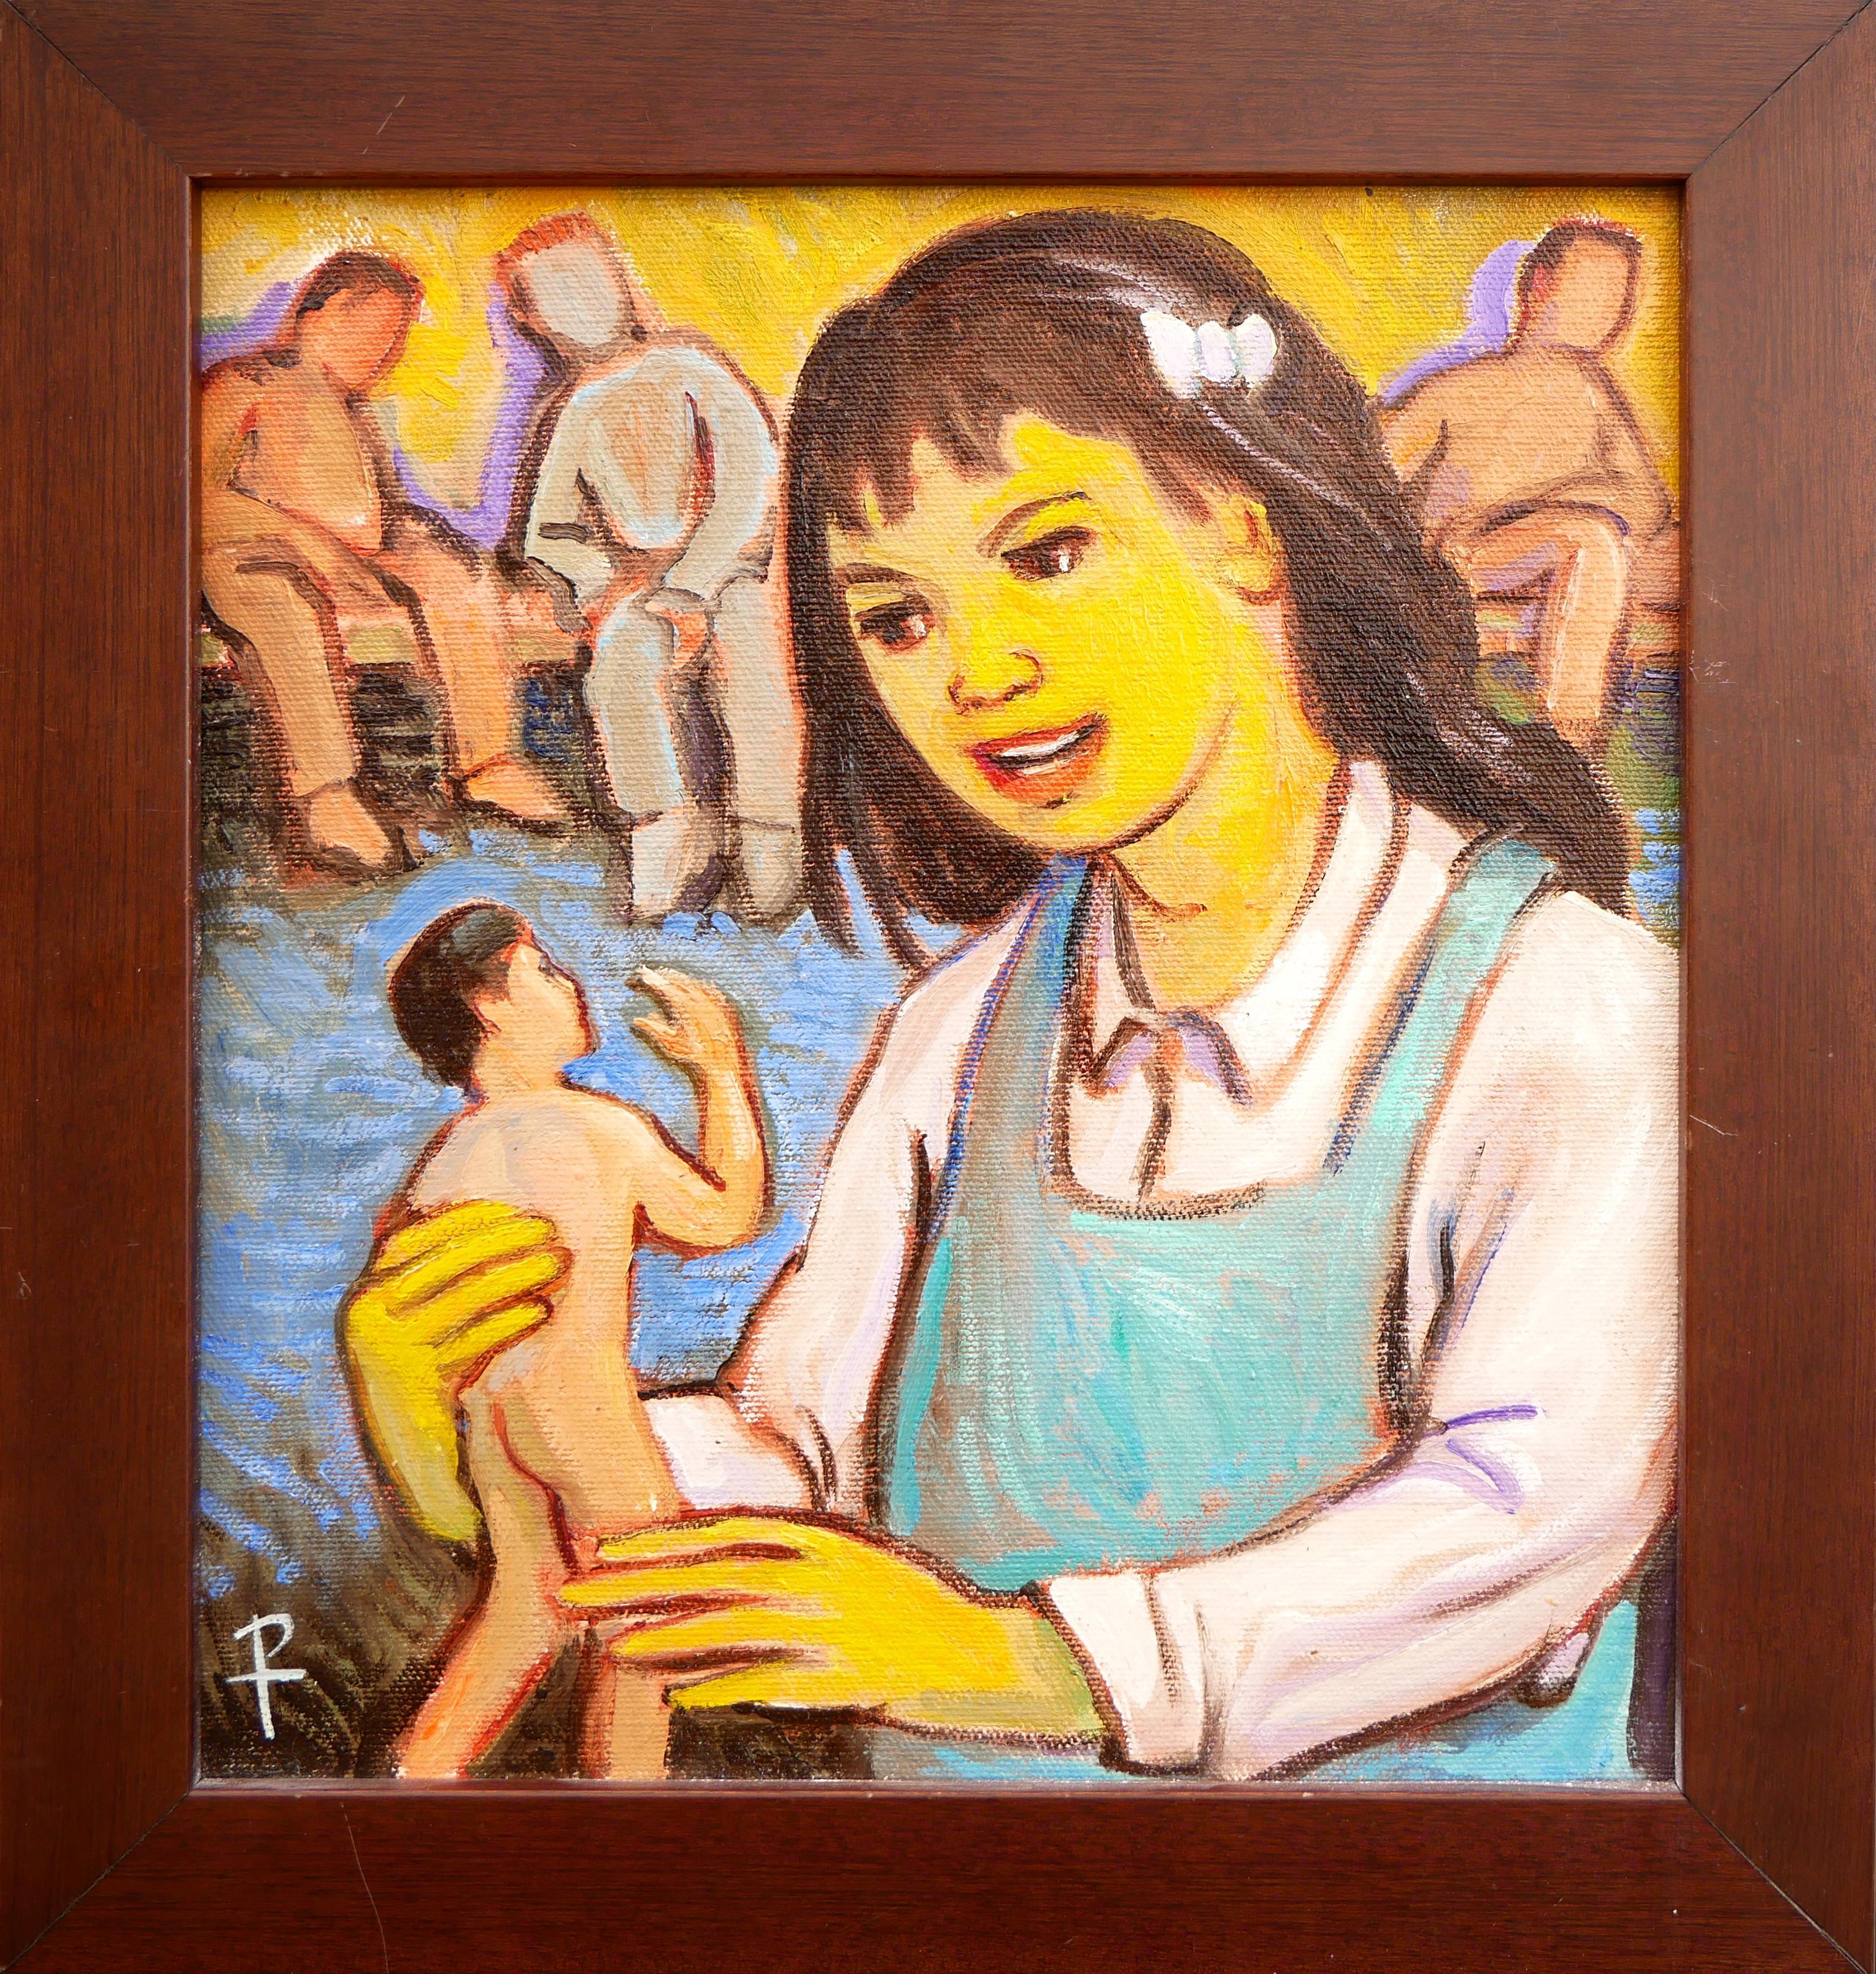 "Dolls" Contemporary Yellow Toned Surrealist Portrait Painting of a Young Girl